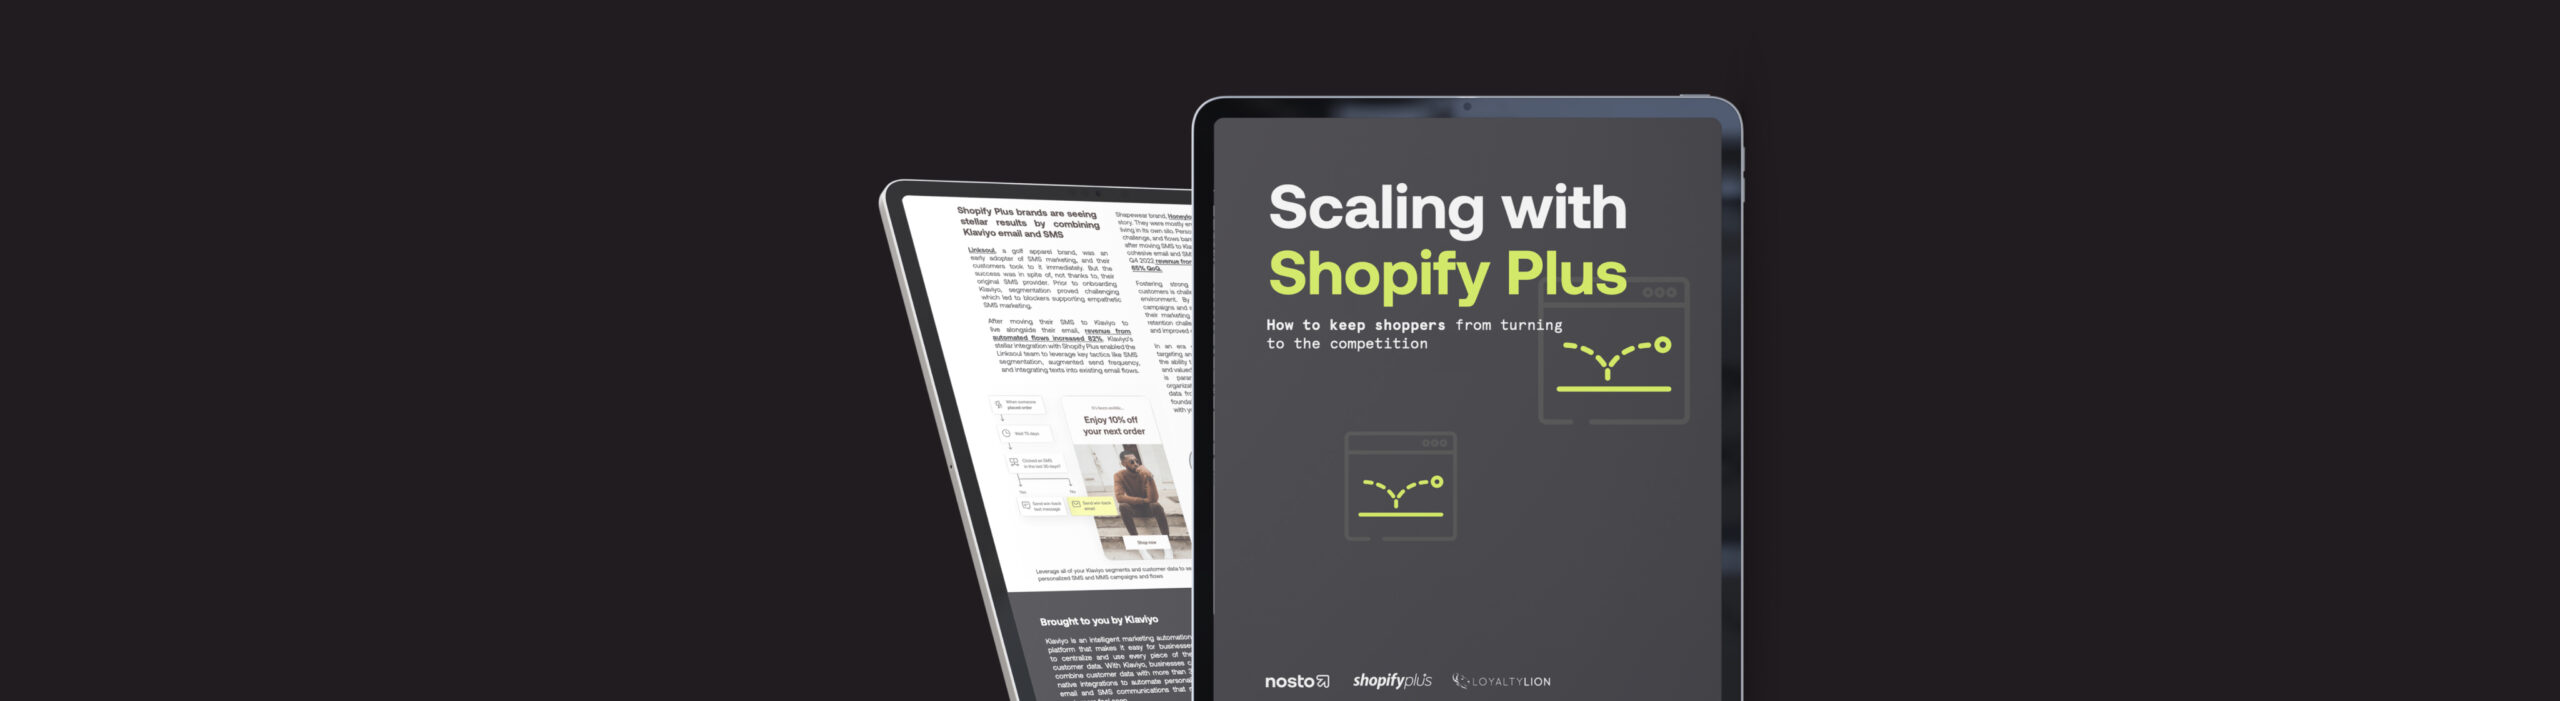 Scaling with Shopify Plus